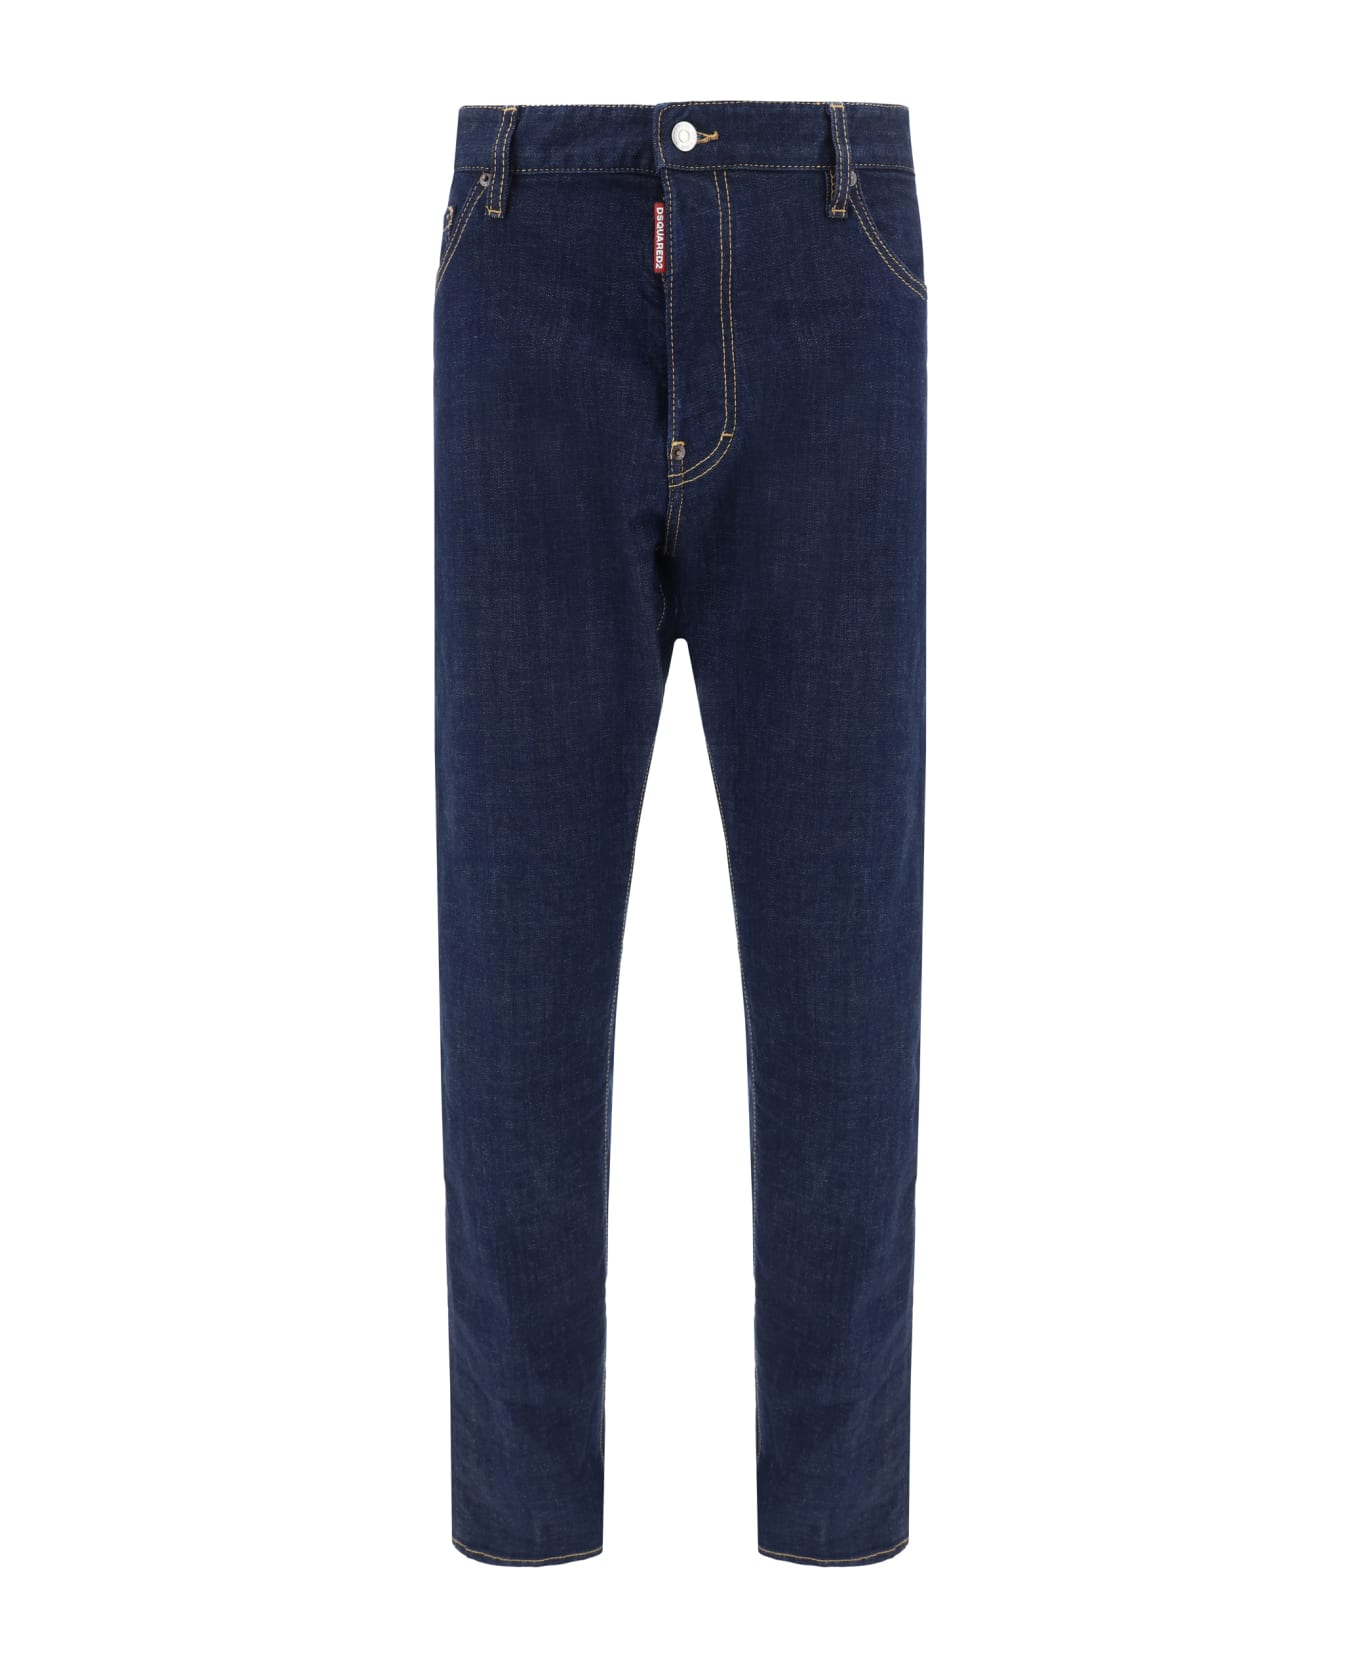 Dsquared2 Cool Guy Jeans - Navy Blue